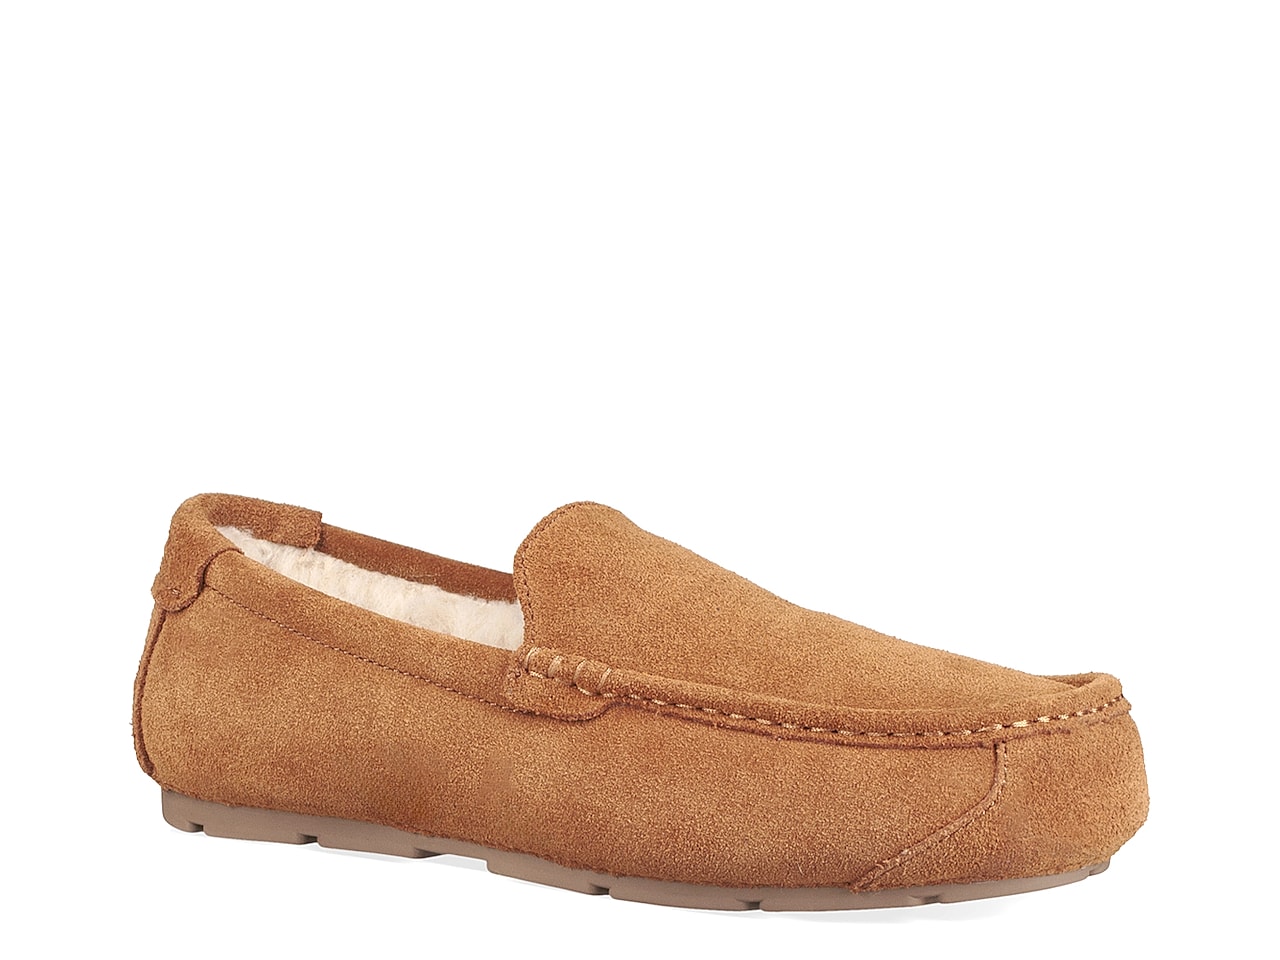 Tipton Slipper; holiday gift guide for him 